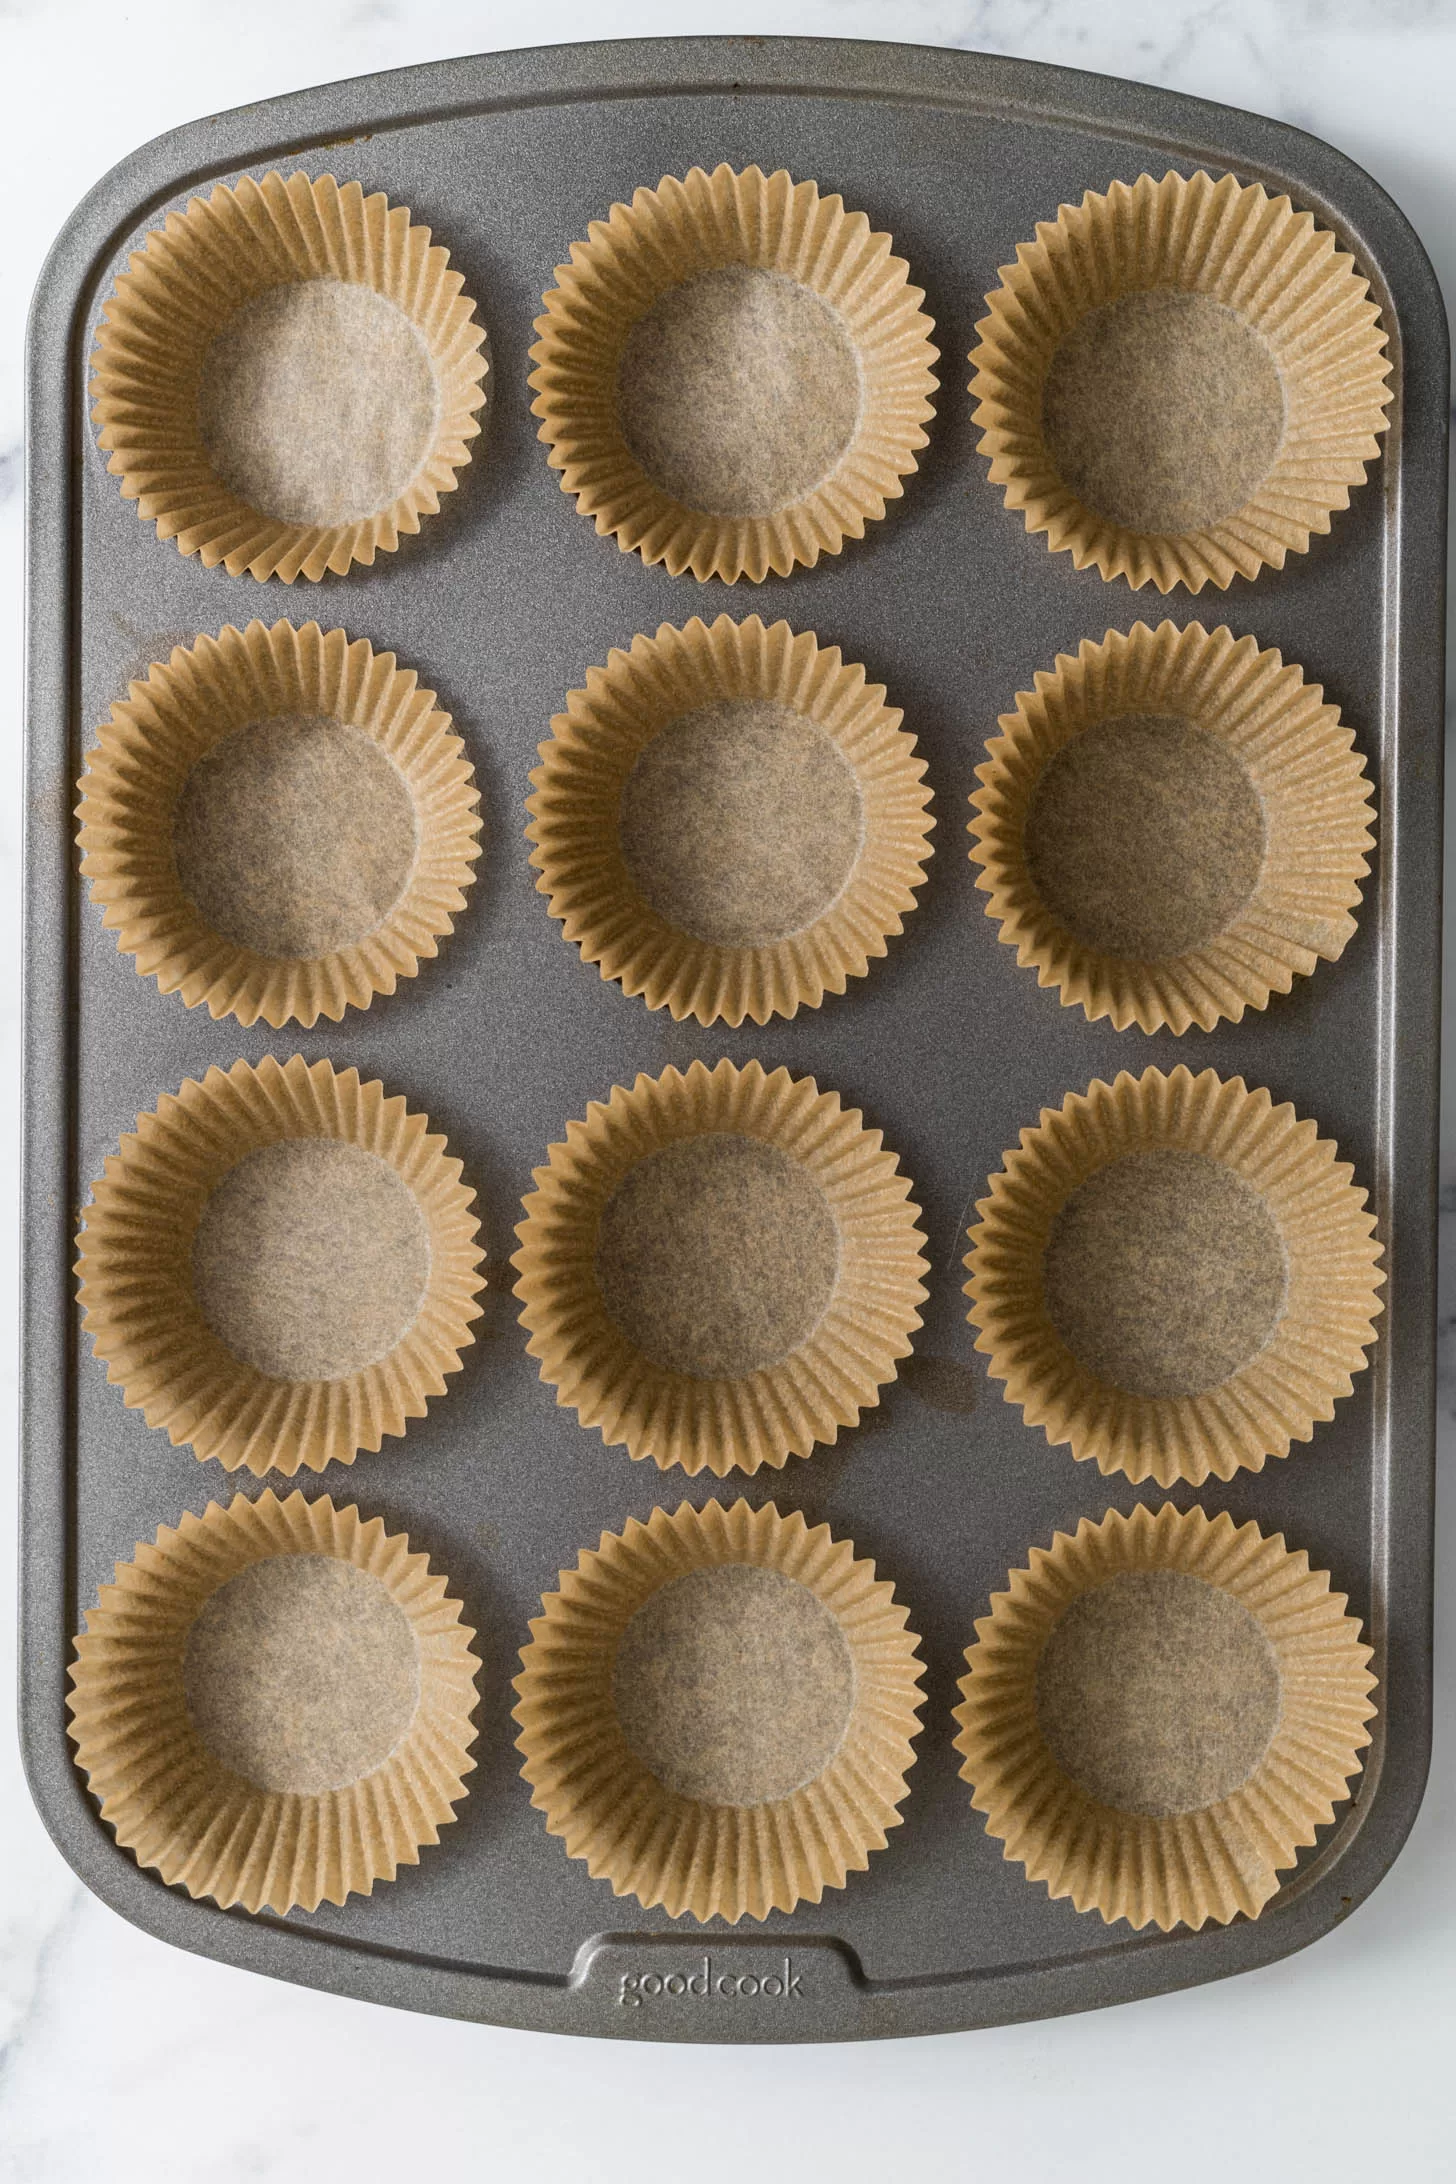 Muffin liners in a muffin tin.